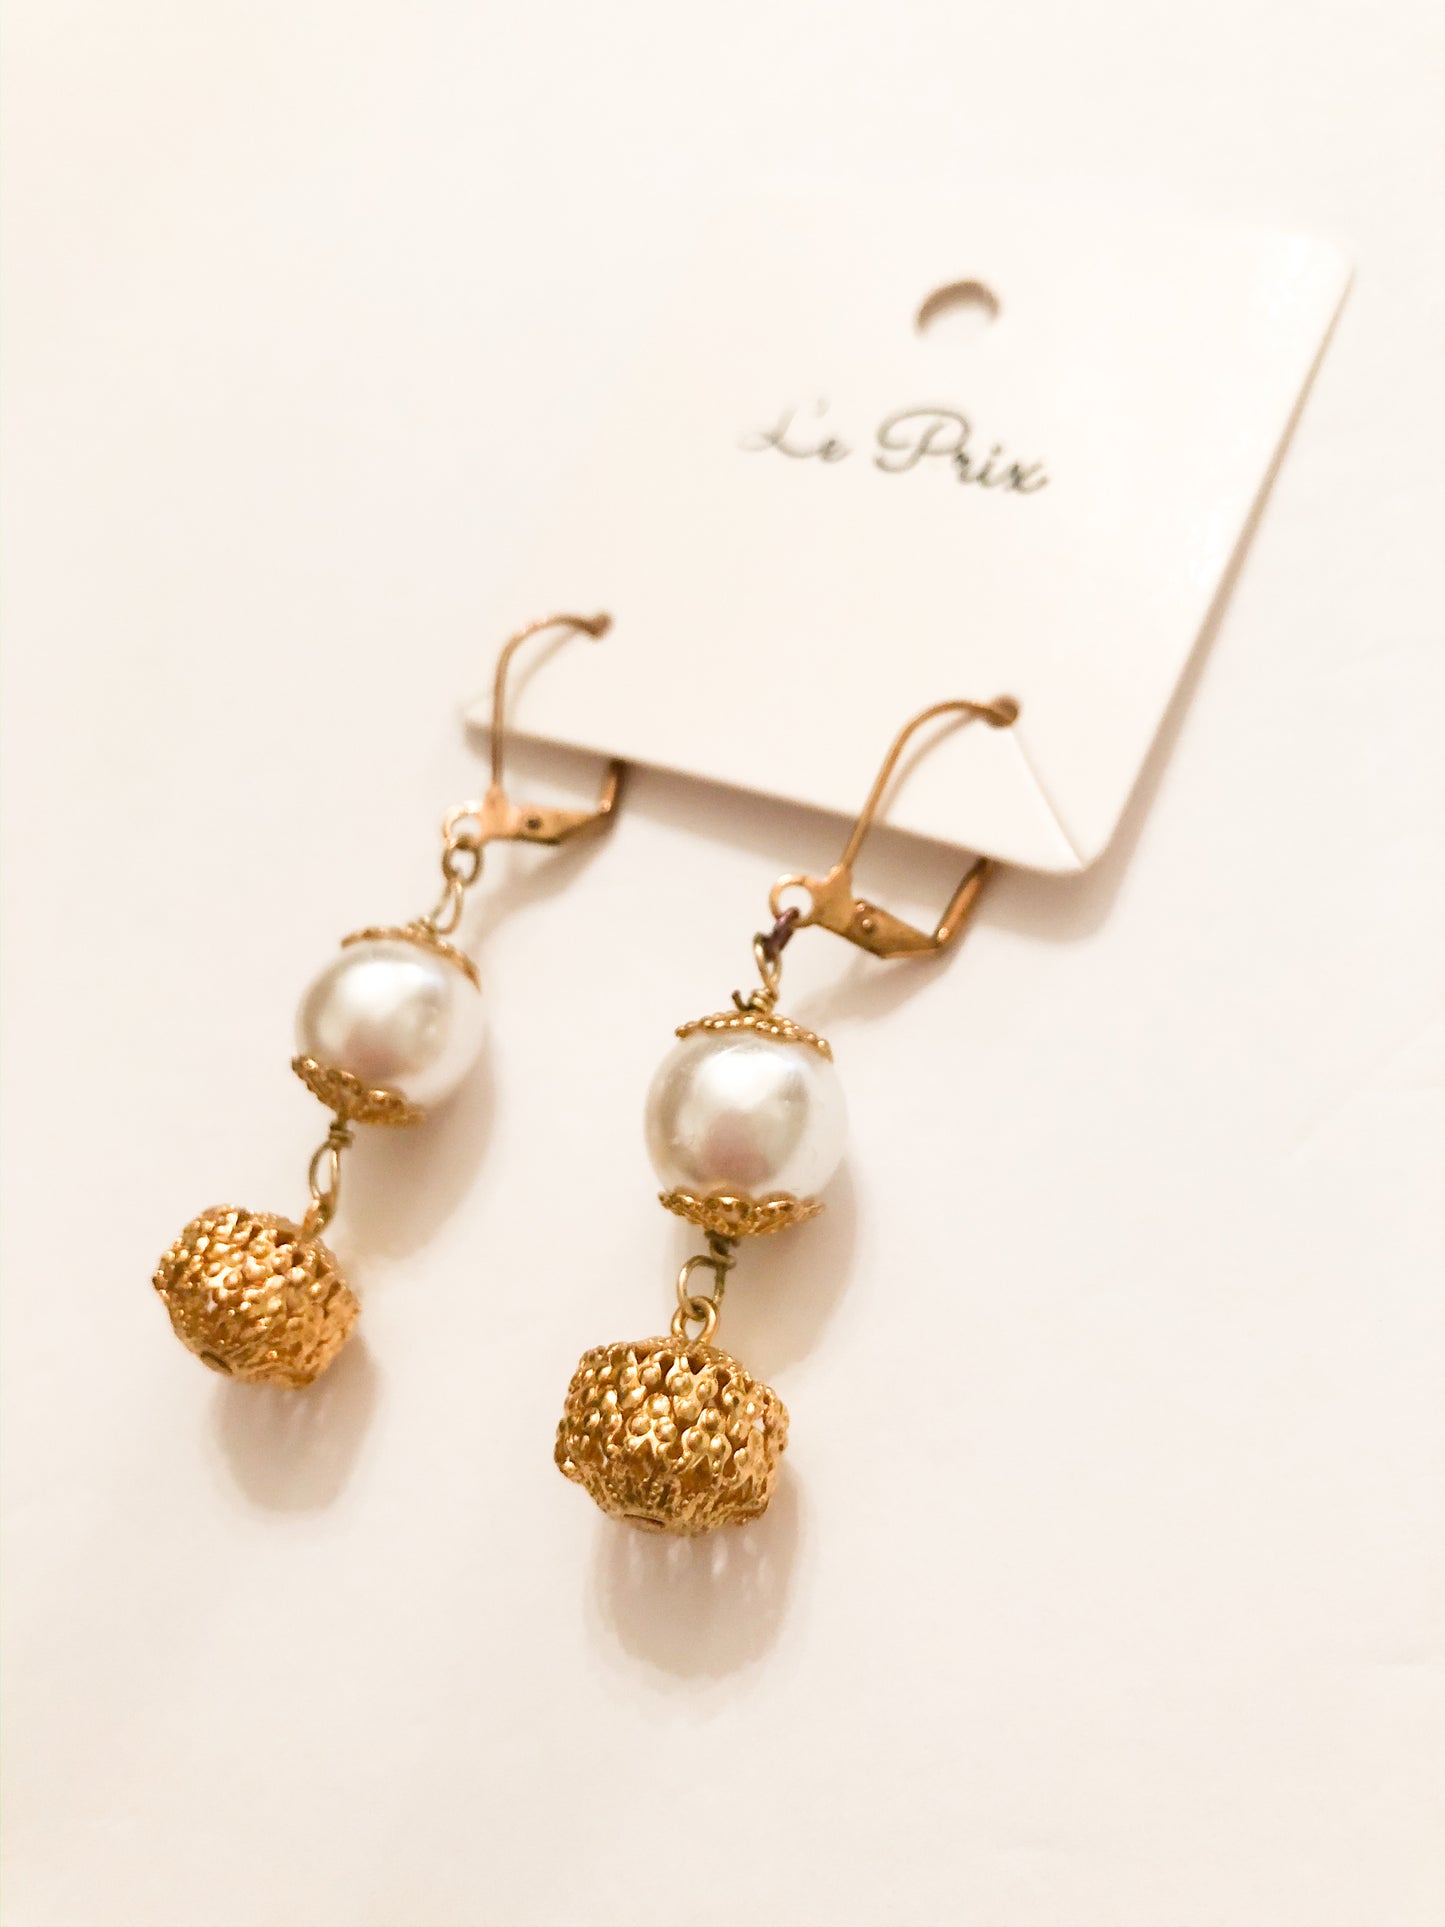 Gold Pearl Orb Drop Earrings - Le Prix Fashion & Consulting